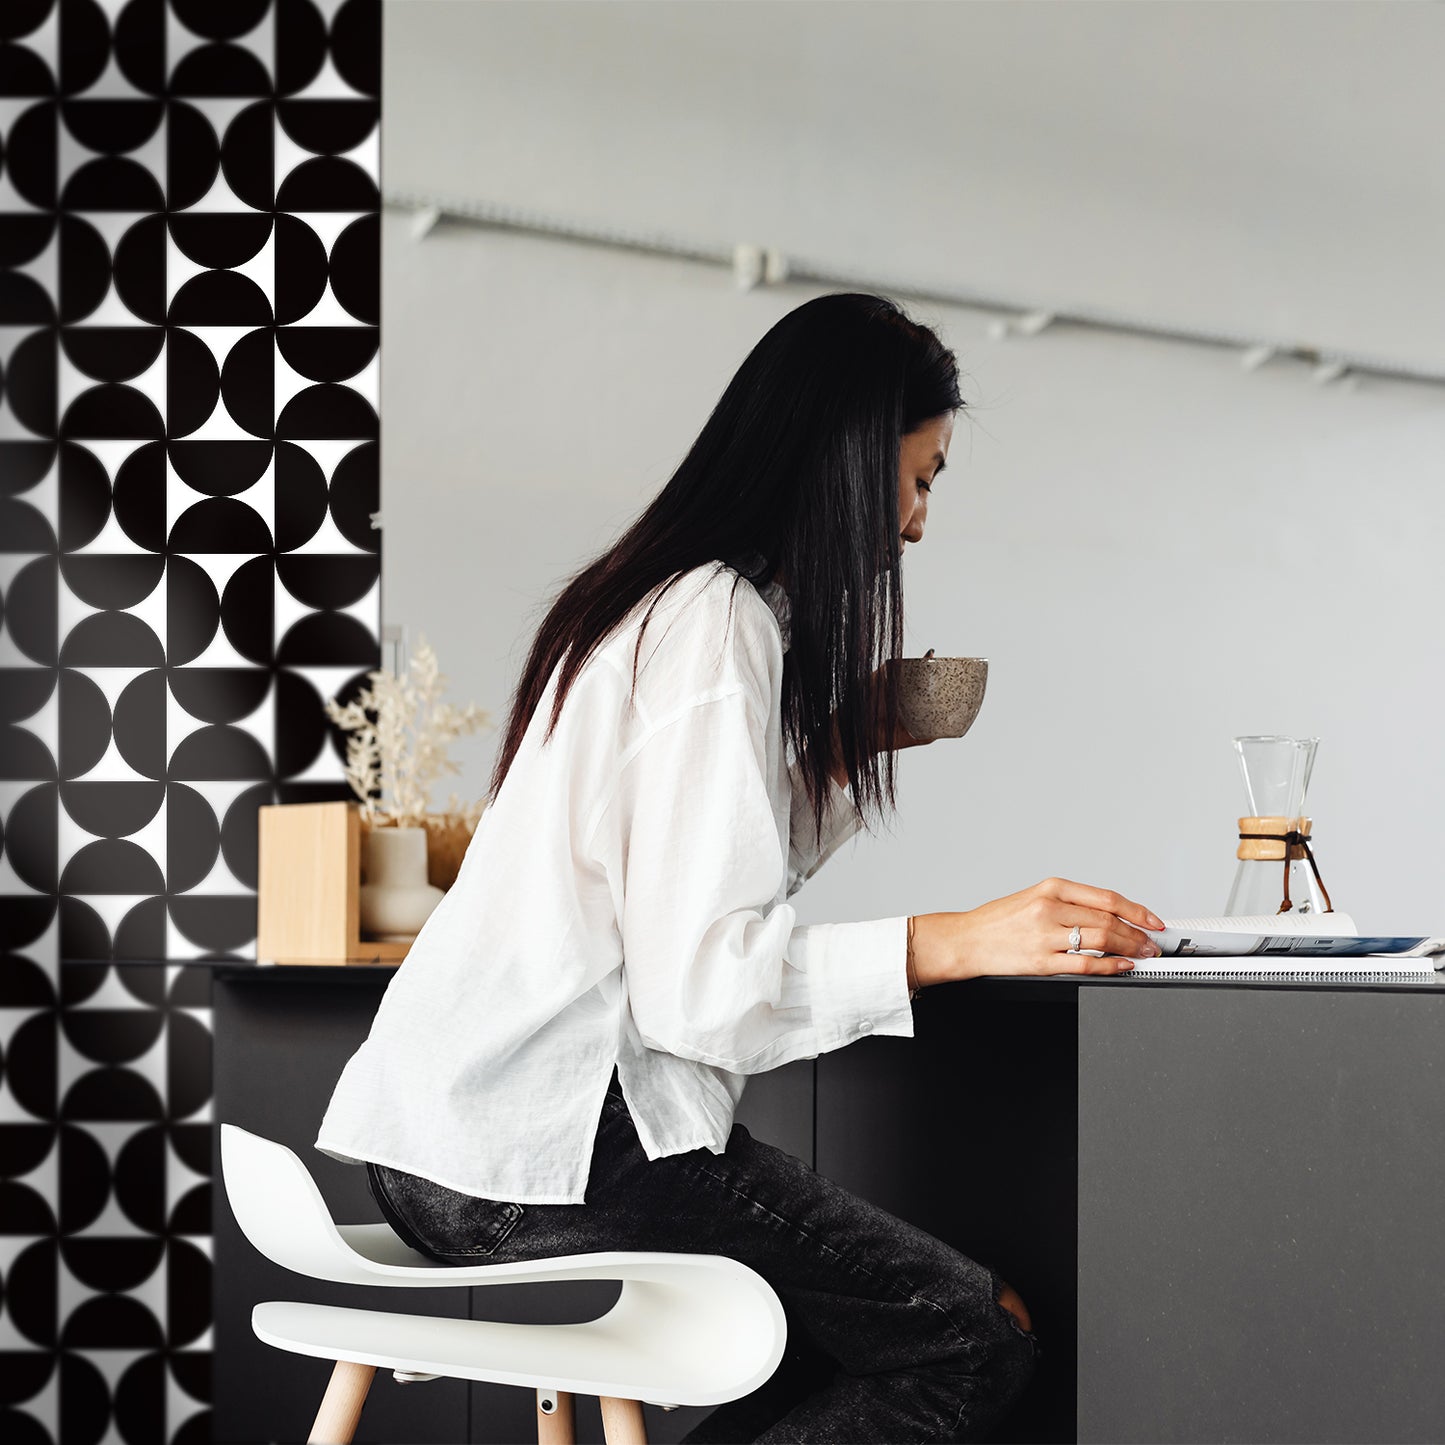 Geometric Black and White Peel and Stick Wallpaper in US | RollsRolla